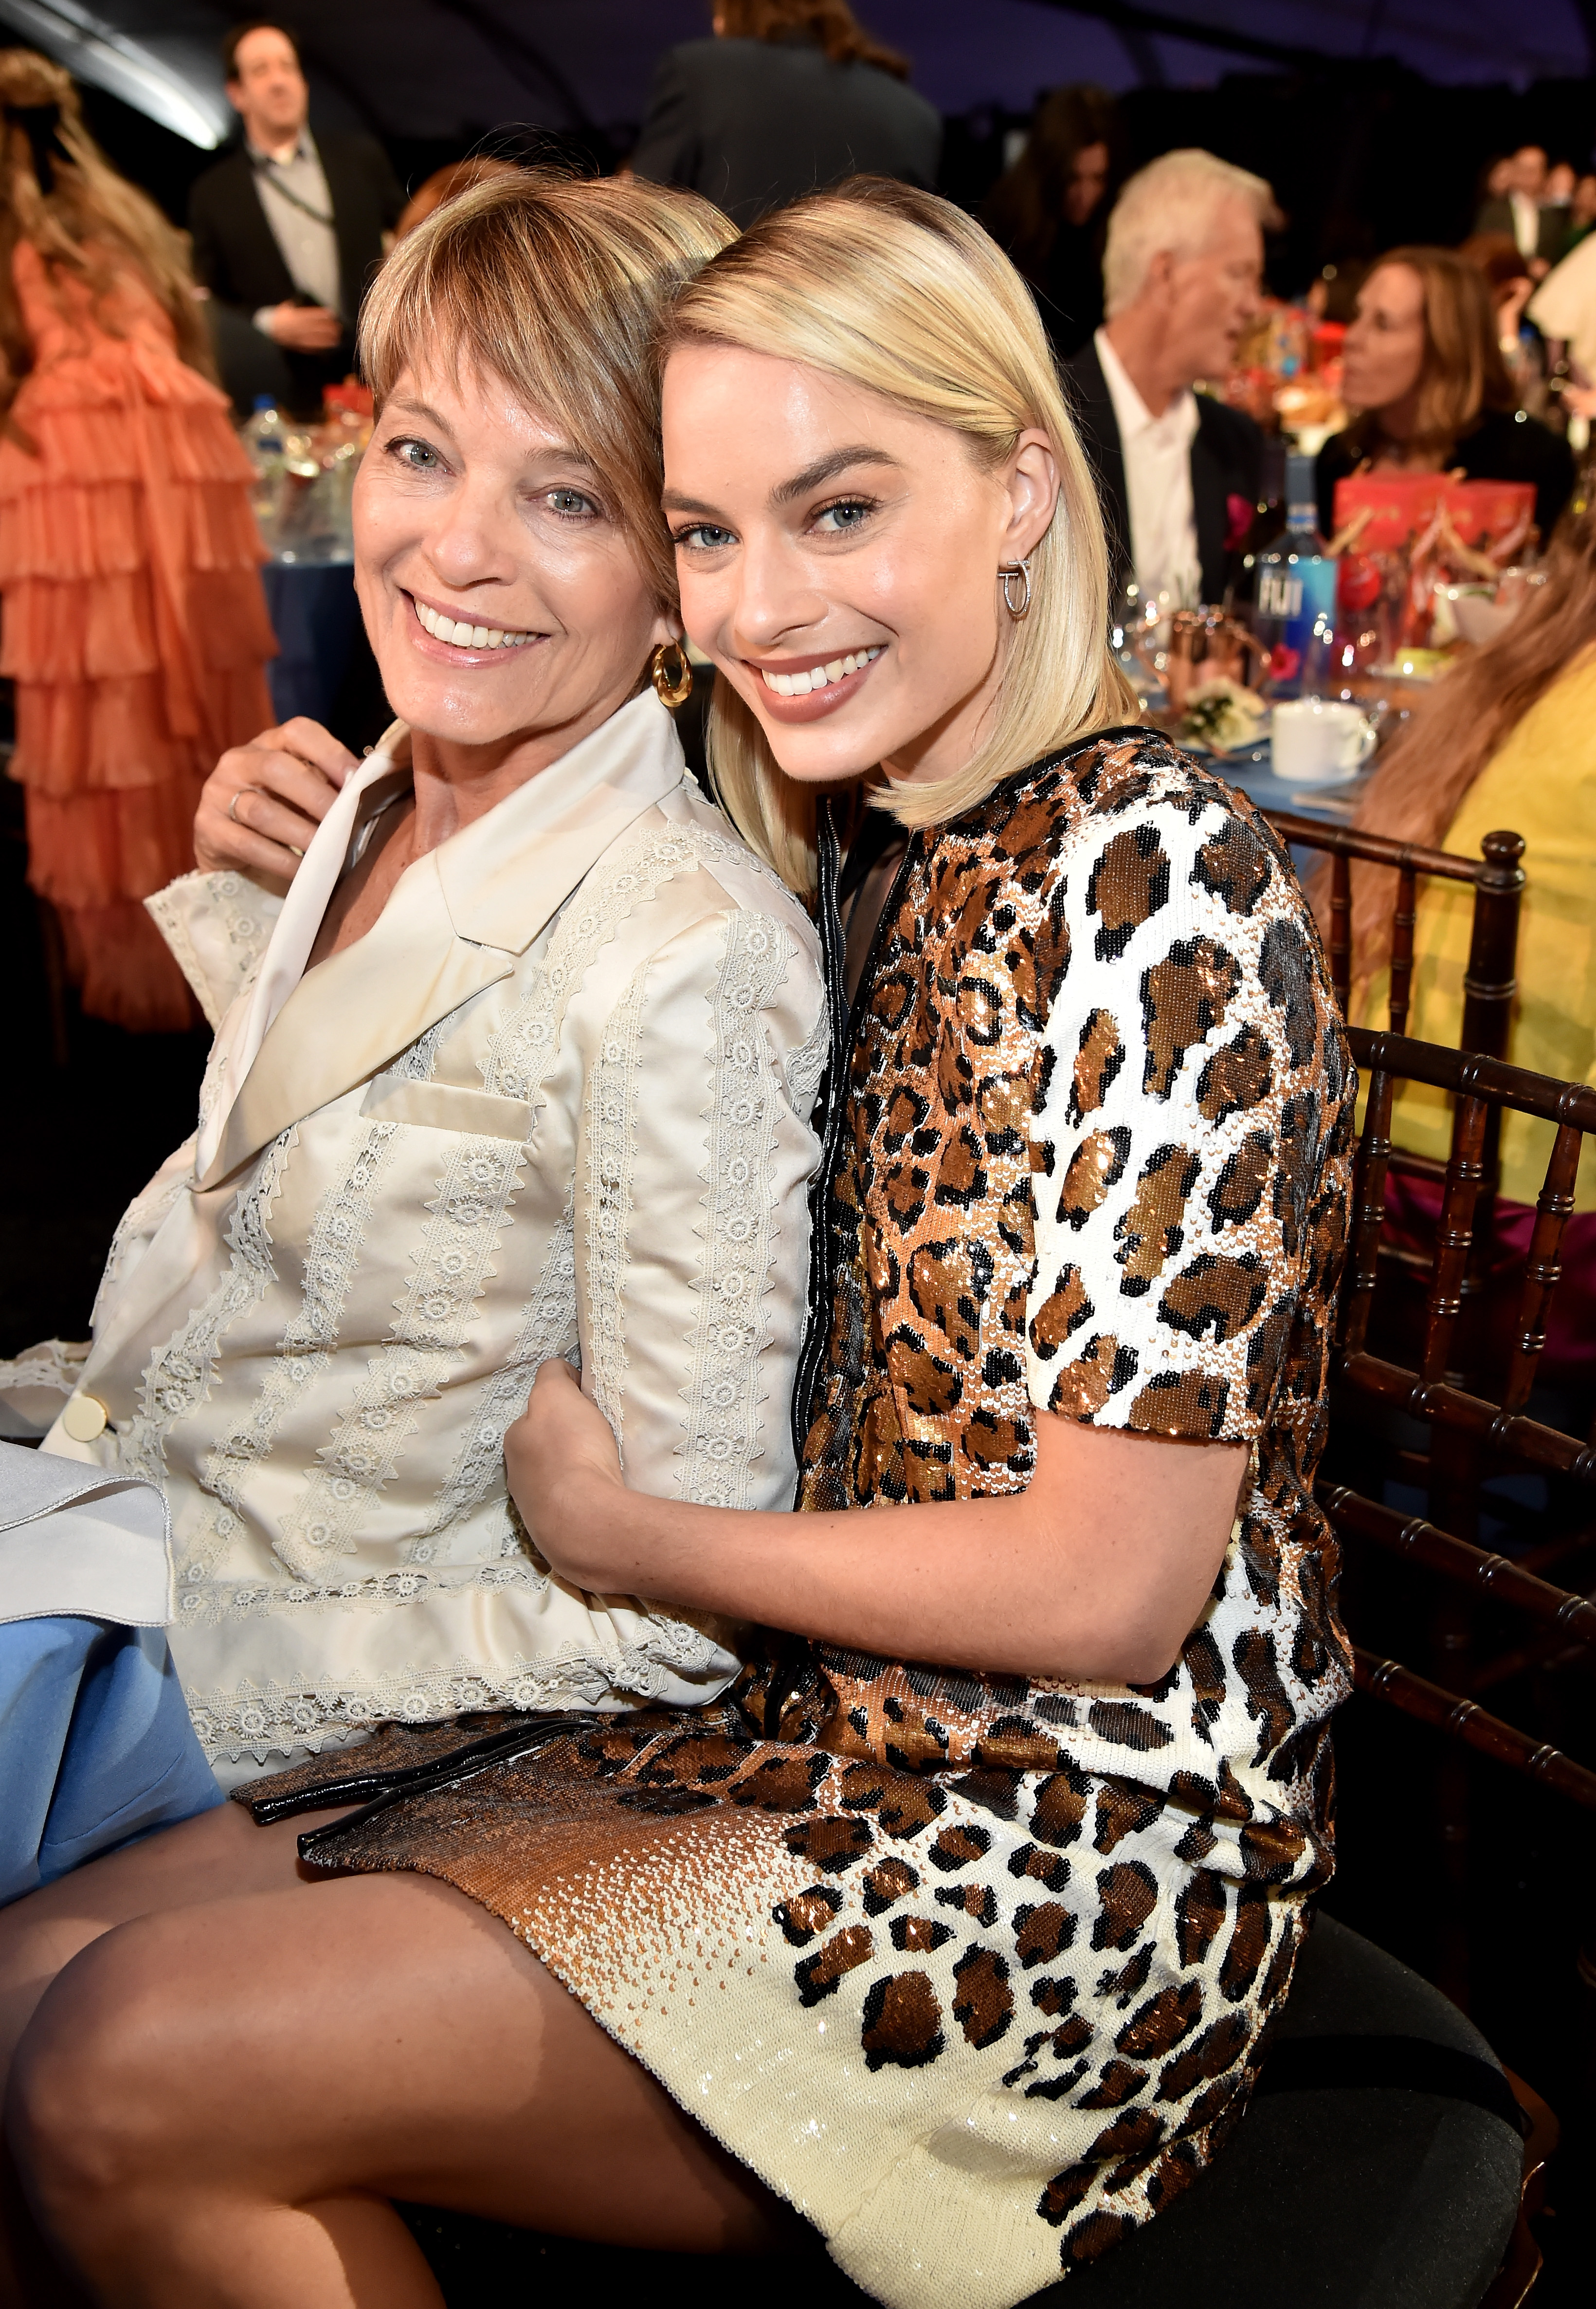 Lachlan Robbie's mother and sister, Sarie Kessler and Margot Robbie, pose during the 2018 Film Independent Spirit Awards on March 3, 2018, in Santa Monica, California | Source: Getty Images